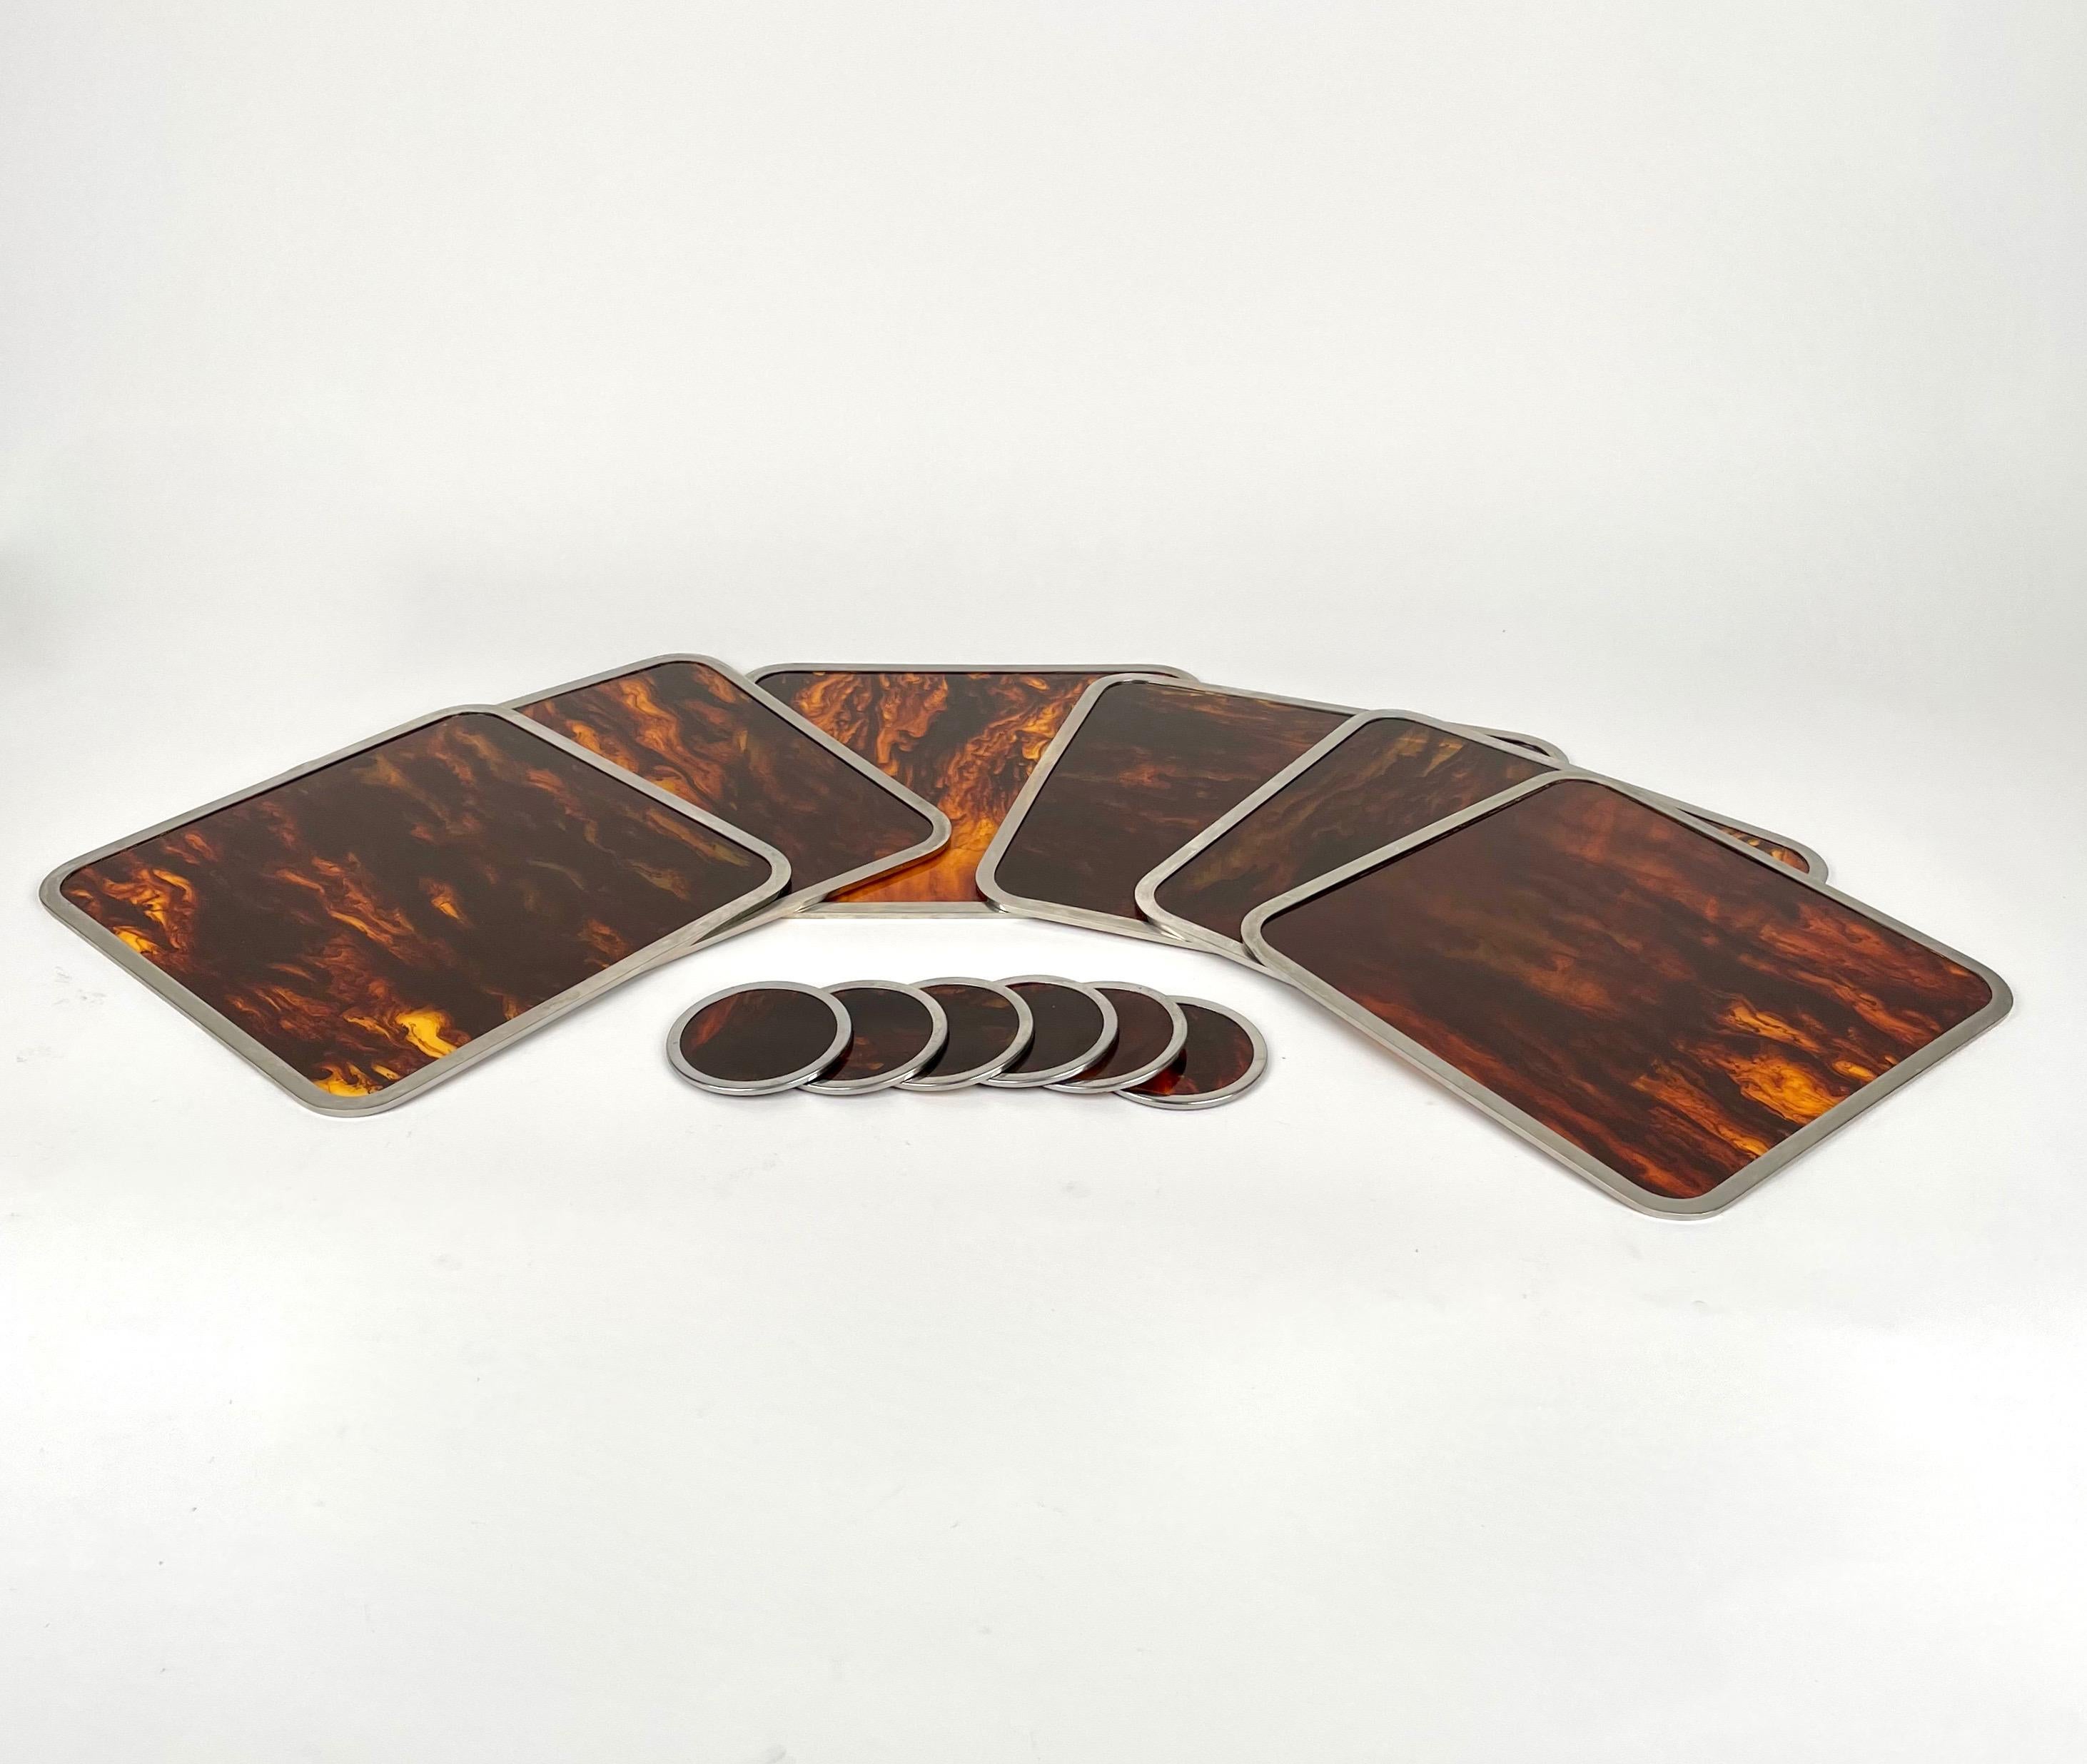 Set of barware coaster and placemats in tortoiseshell effect lucite framed by chrome in the style of Christian Dior, Italy, 1970s. 

Coaster dimensions: diameter 10.5 cm, height 0.5 cm.